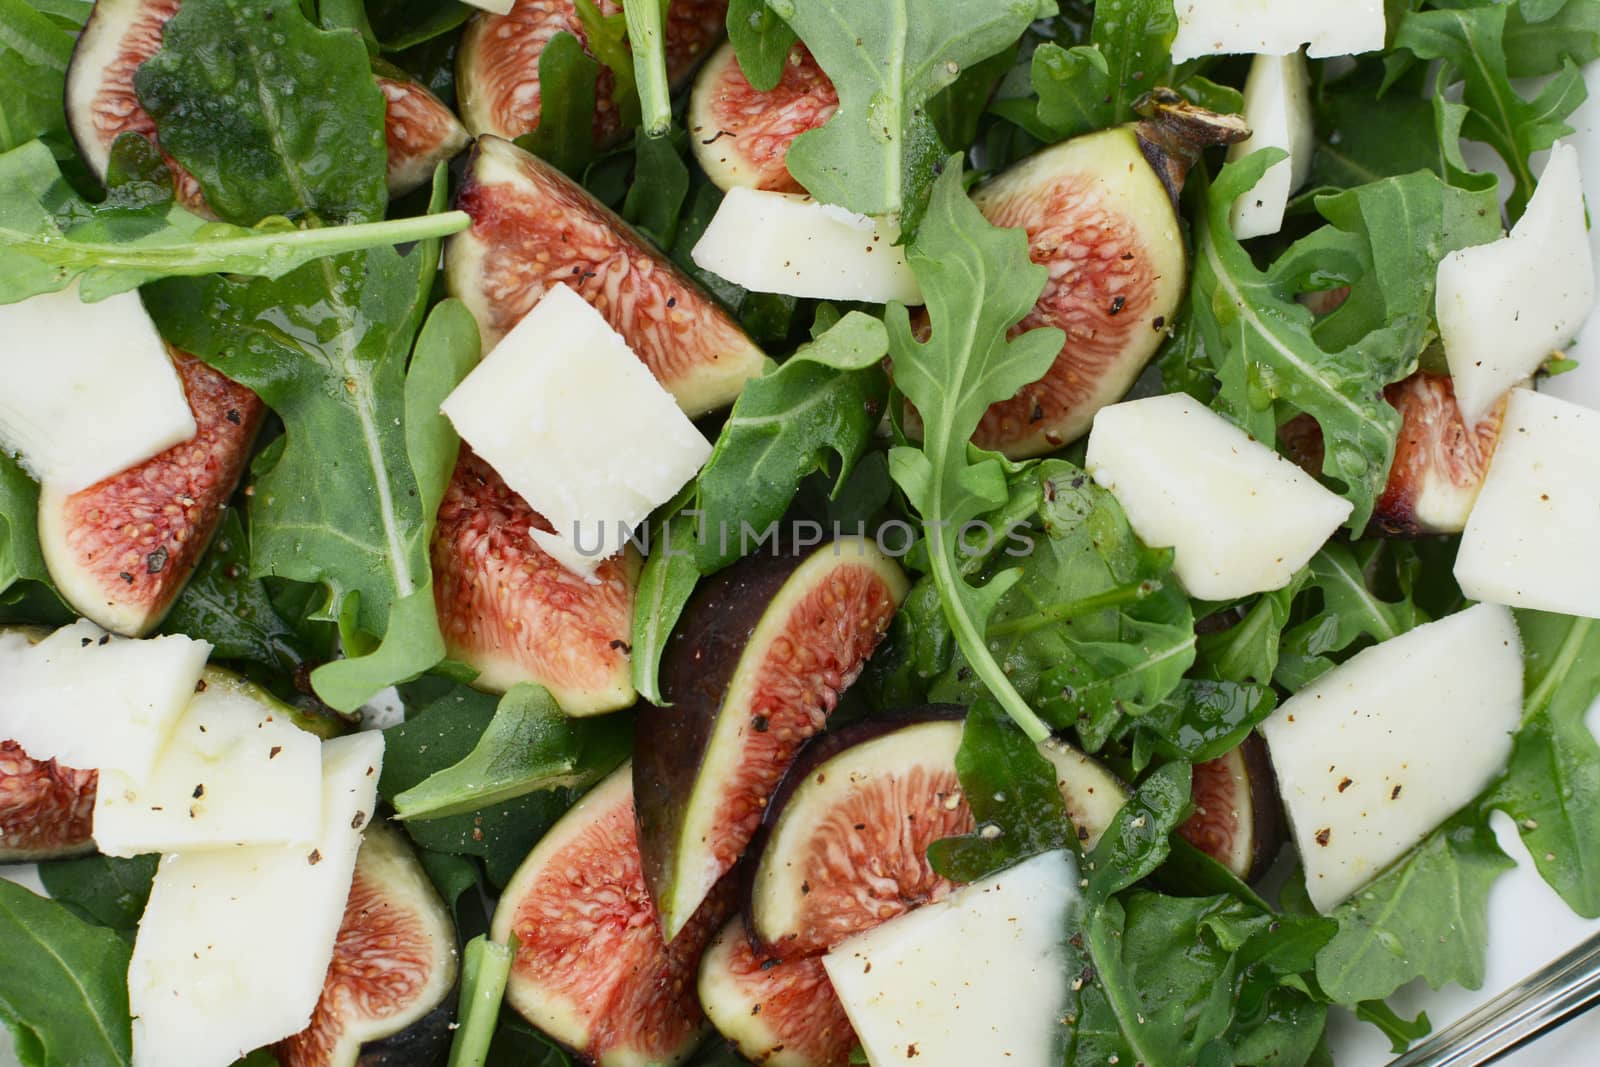 Wedges of fresh figs, chunks of pecorino cheese and green rocket leaves in a fresh summer salad